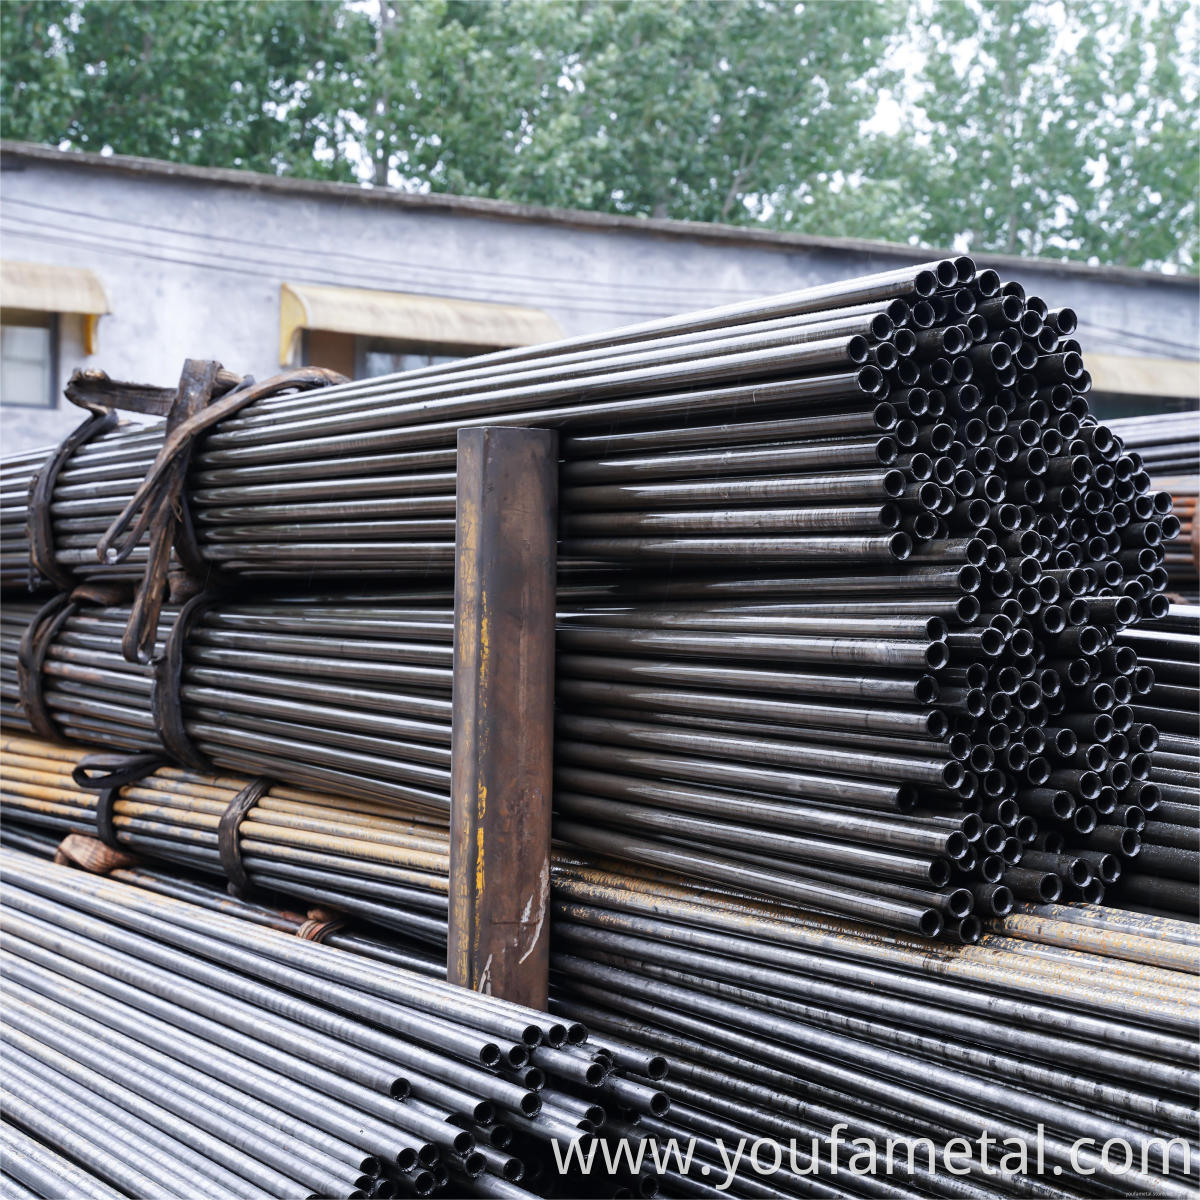 Cold Drawn Steel Pipe